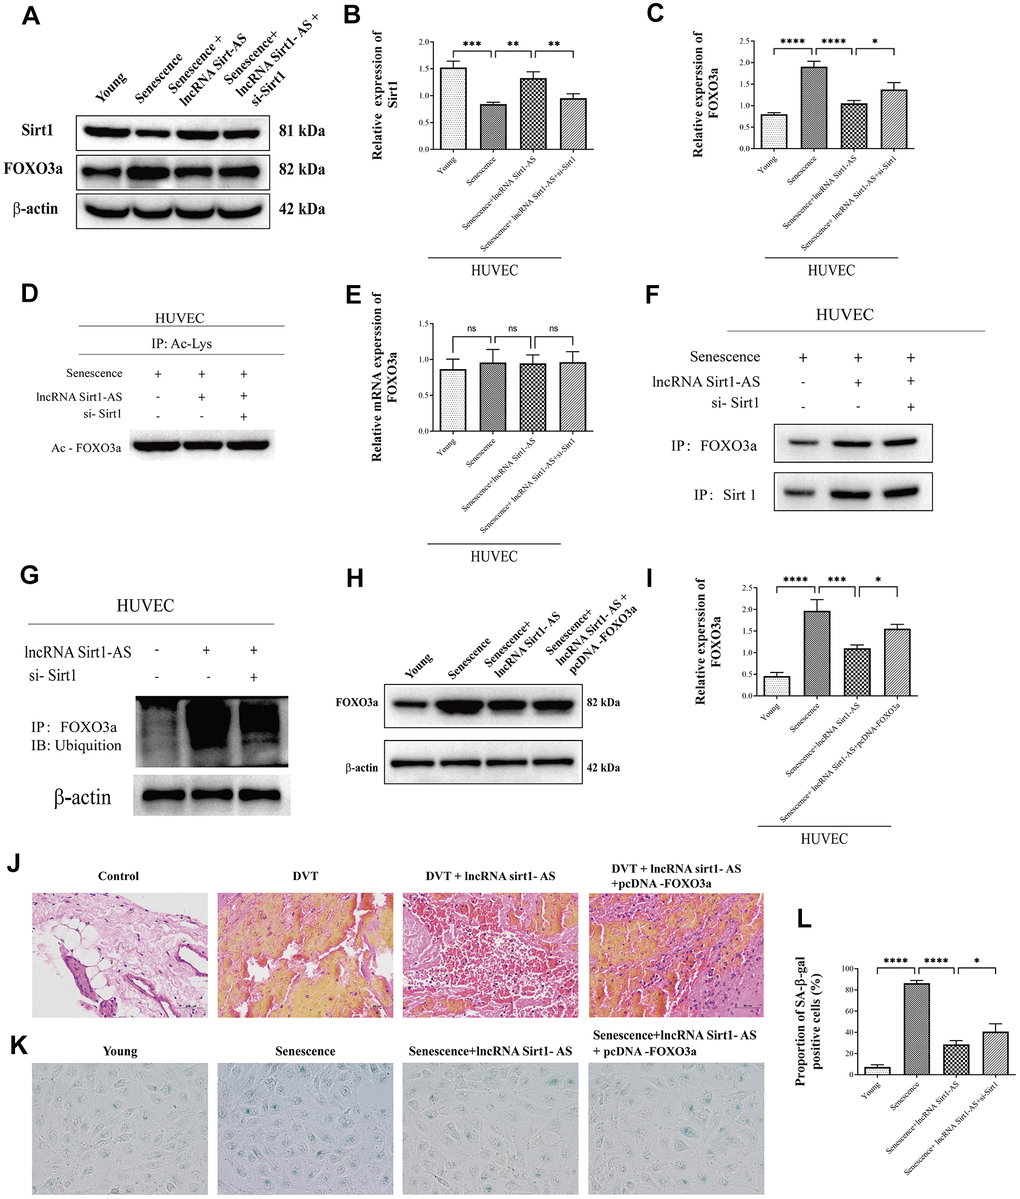 LncRNA Sirt1-AS regulated DVT through FOXO3a ubiquitination and degradation (A–D) Protein expression of Sirt1, FOXO3a and its acetylation were detected. (E) Relative mRNA expression of FOXO3a. (F) Co-IP was performed to detect the interaction of Sirt1 and FOXO3a. (G) Western blot was used to detect the FOXO3a ubiquitination level. (H, I) Western blot was used to detect the protein expression of FOXO3a after pcDNA3.1-FOXO3a transfection. (J) HE staining of endothelia of SAMP-1 mice. (40*) (K, L) proportion of SA-β-Gal positive cells. Error bars represent SD. *, p